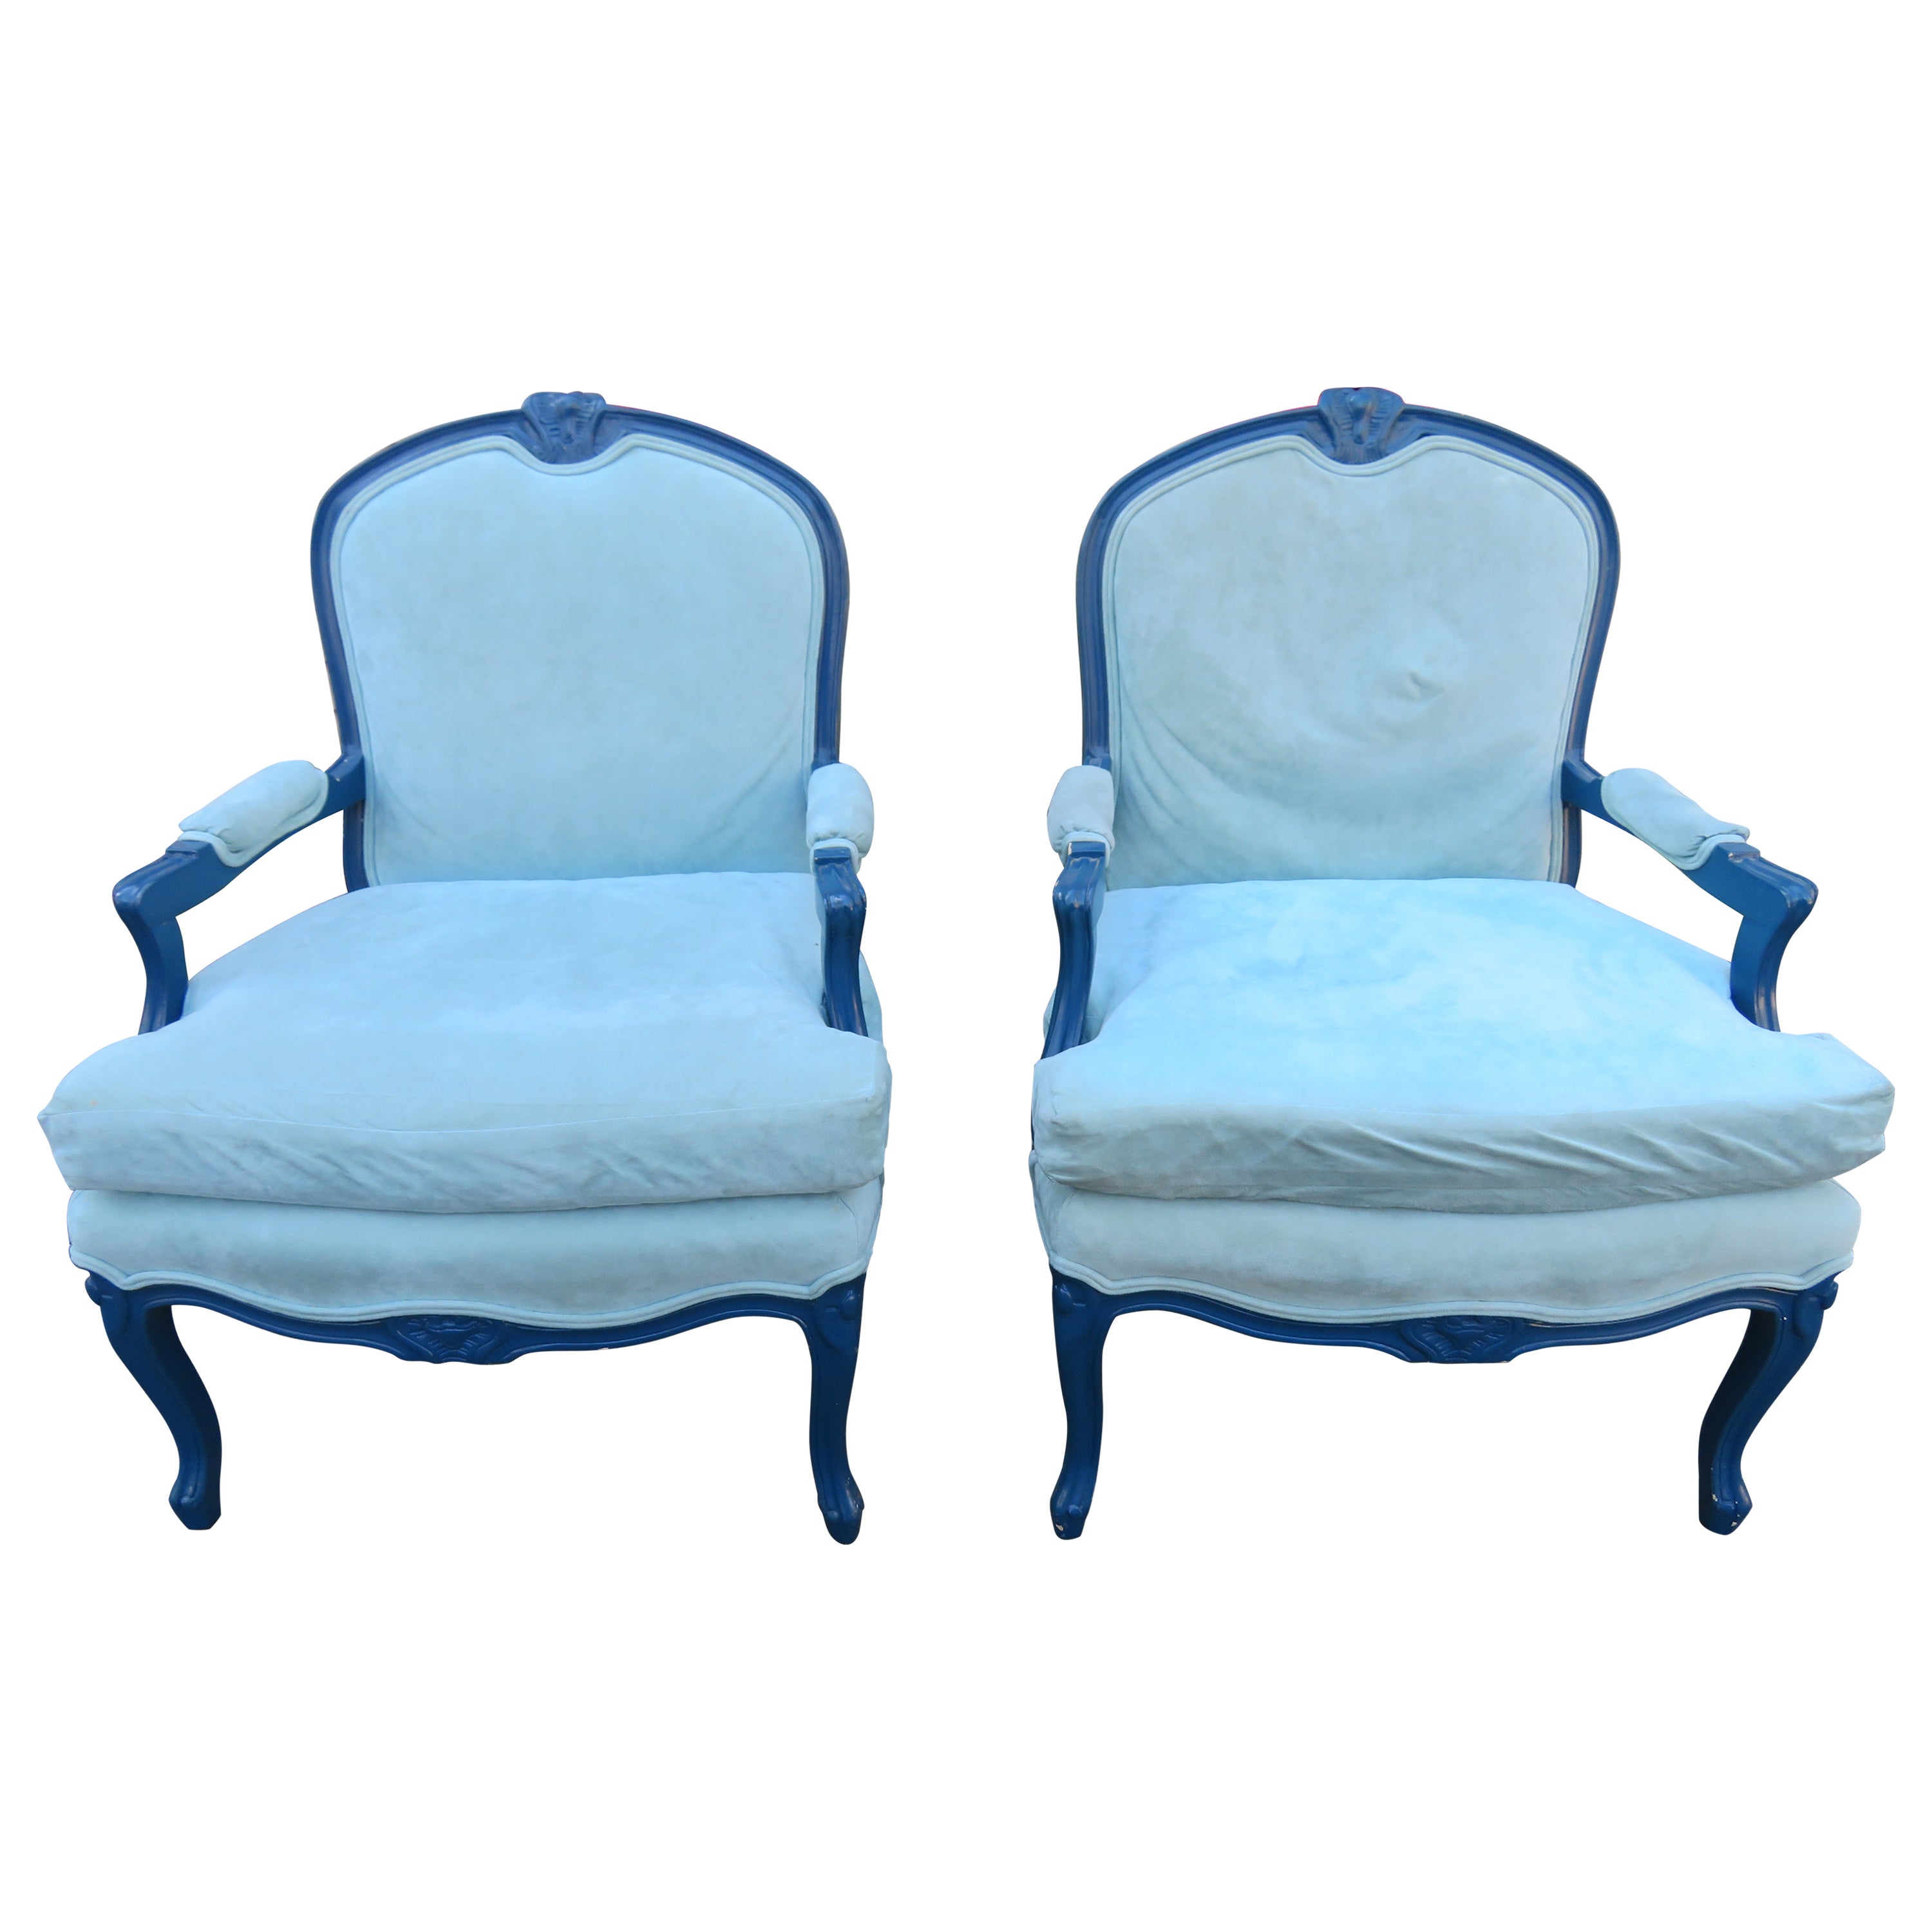 Exciting Pair Erwin Lambert Louis XV Lacquered Fauteuil Chairs Mid-Century